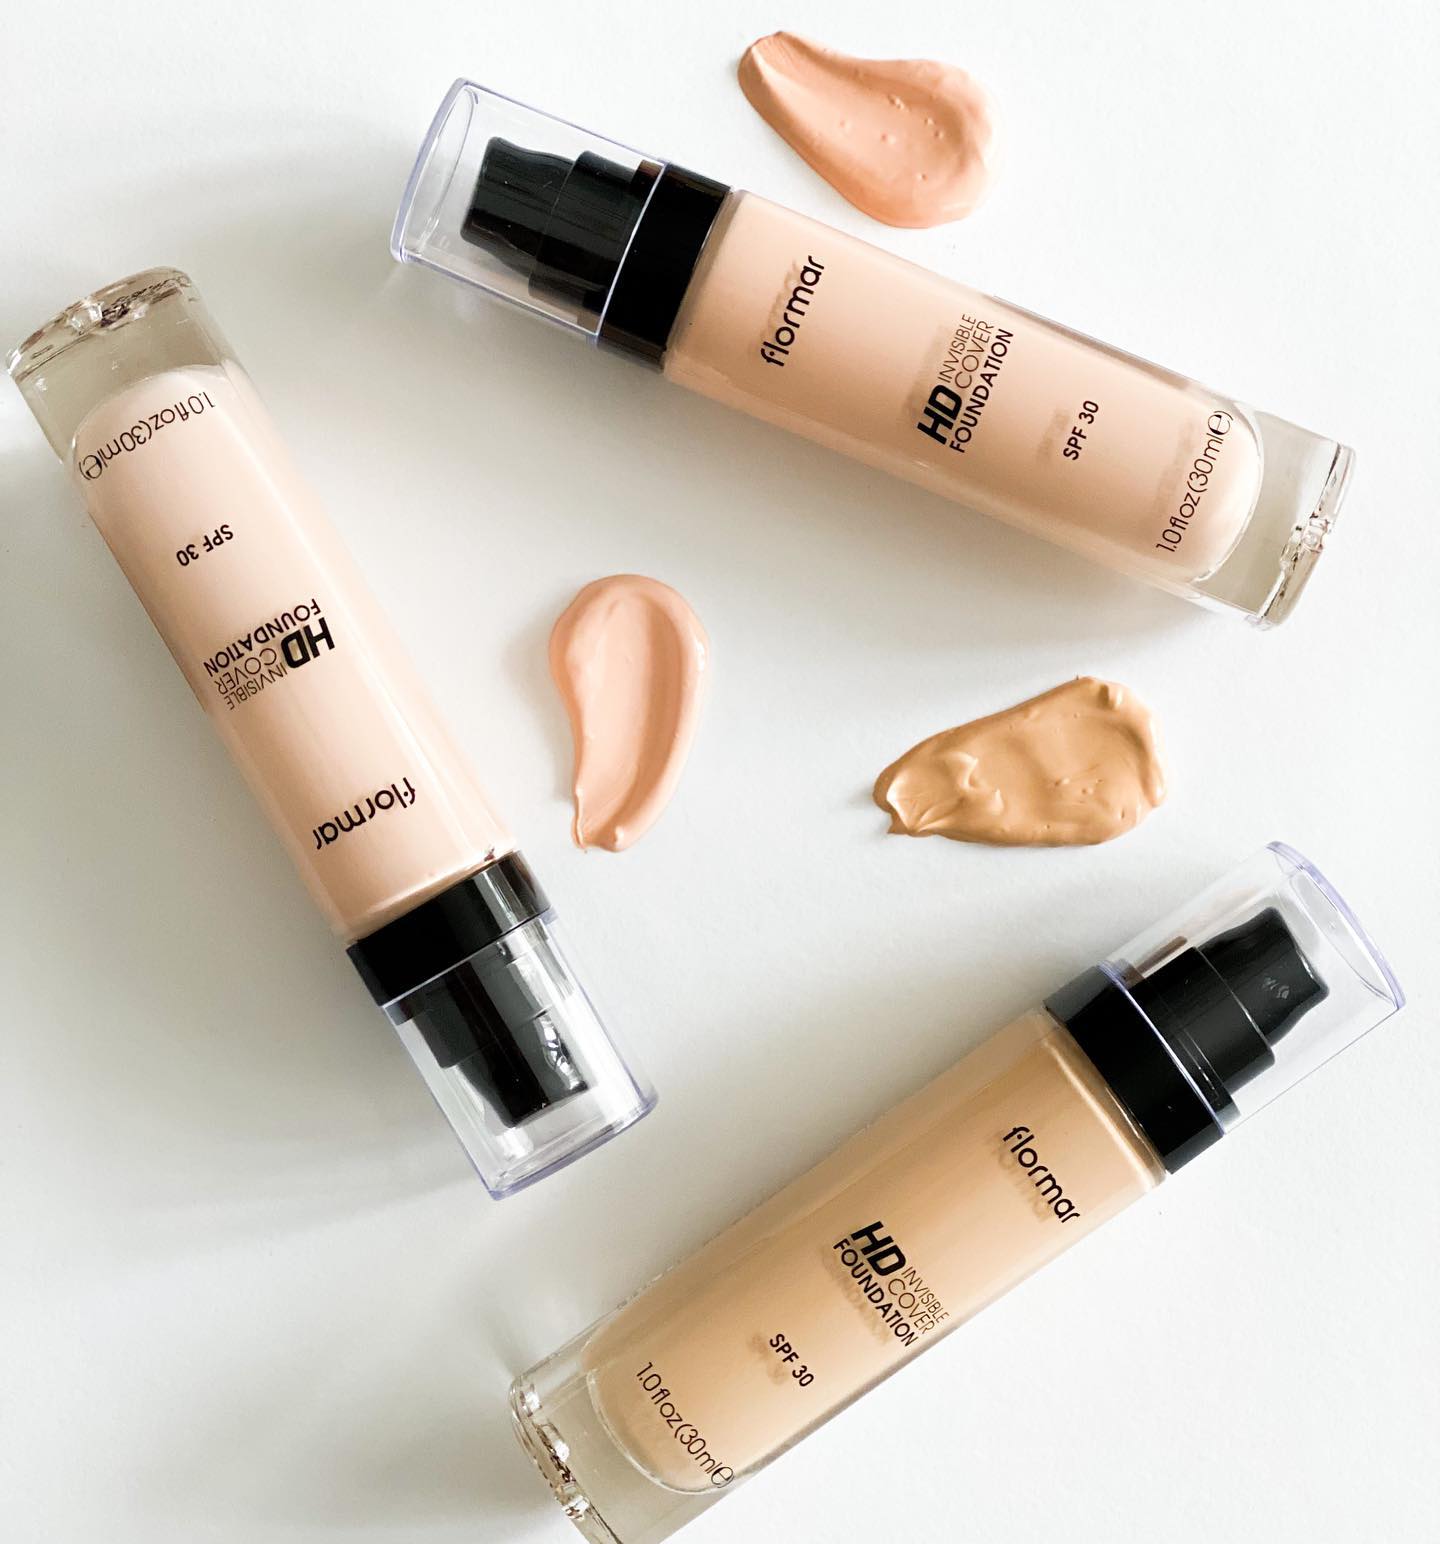 Flormar Invisible Cover HD Foundation – RIOS